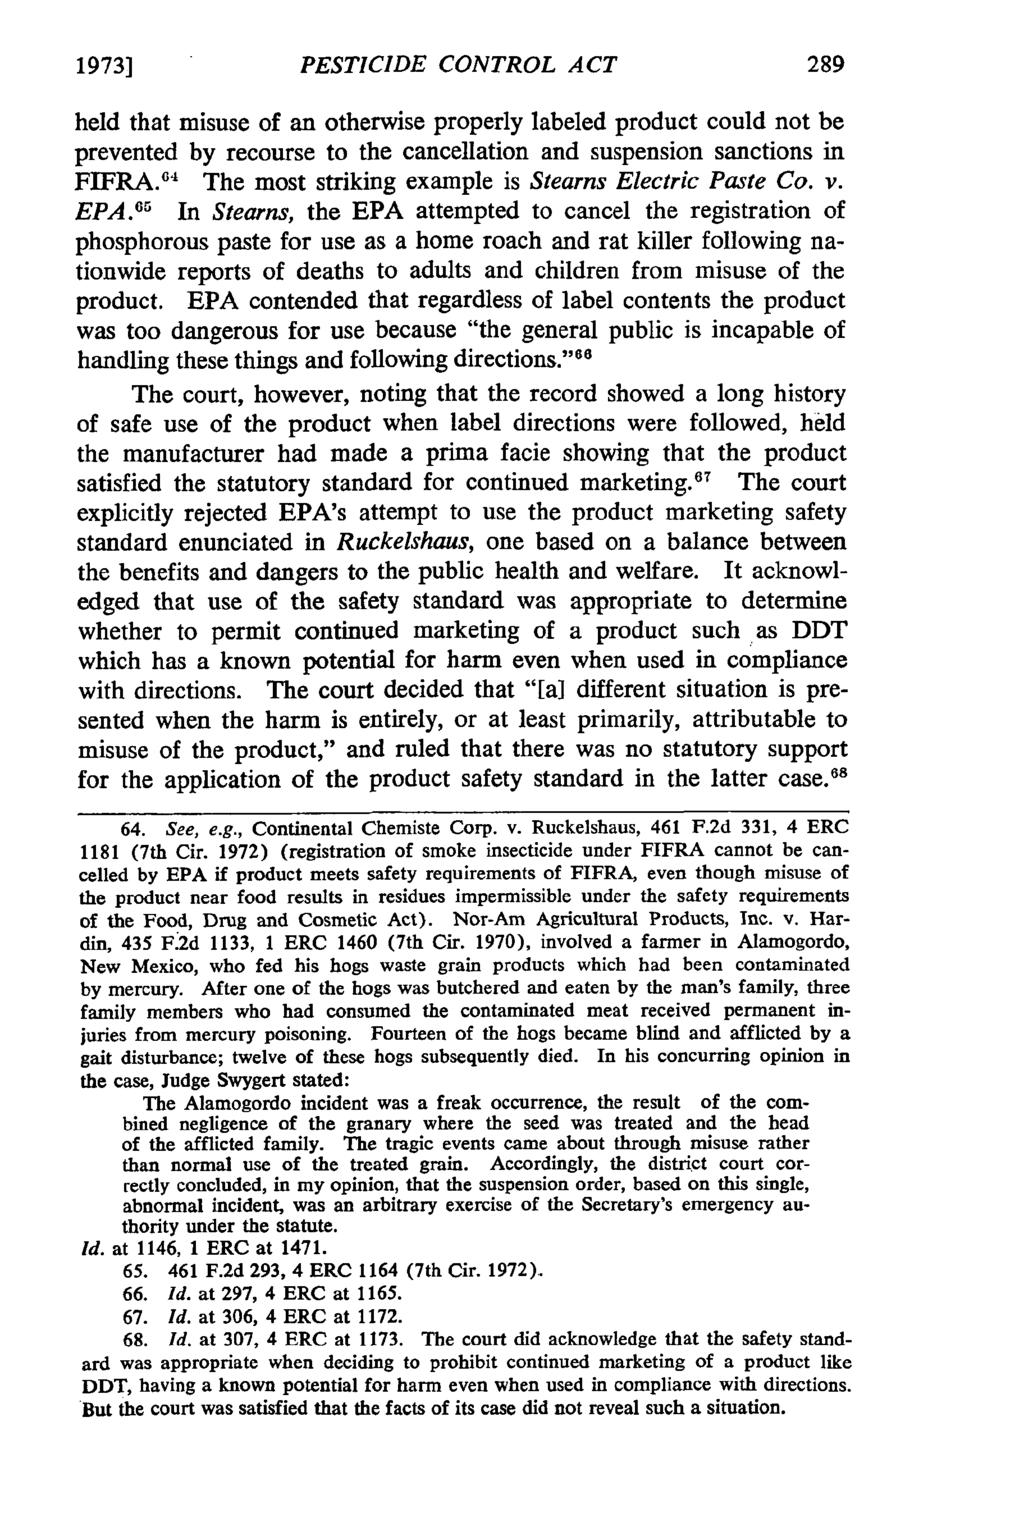 1973] PESTICIDE CONTROL ACT held that misuse of an otherwise properly labeled product could not be prevented by recourse to the cancellation and suspension sanctions in FIFRA.